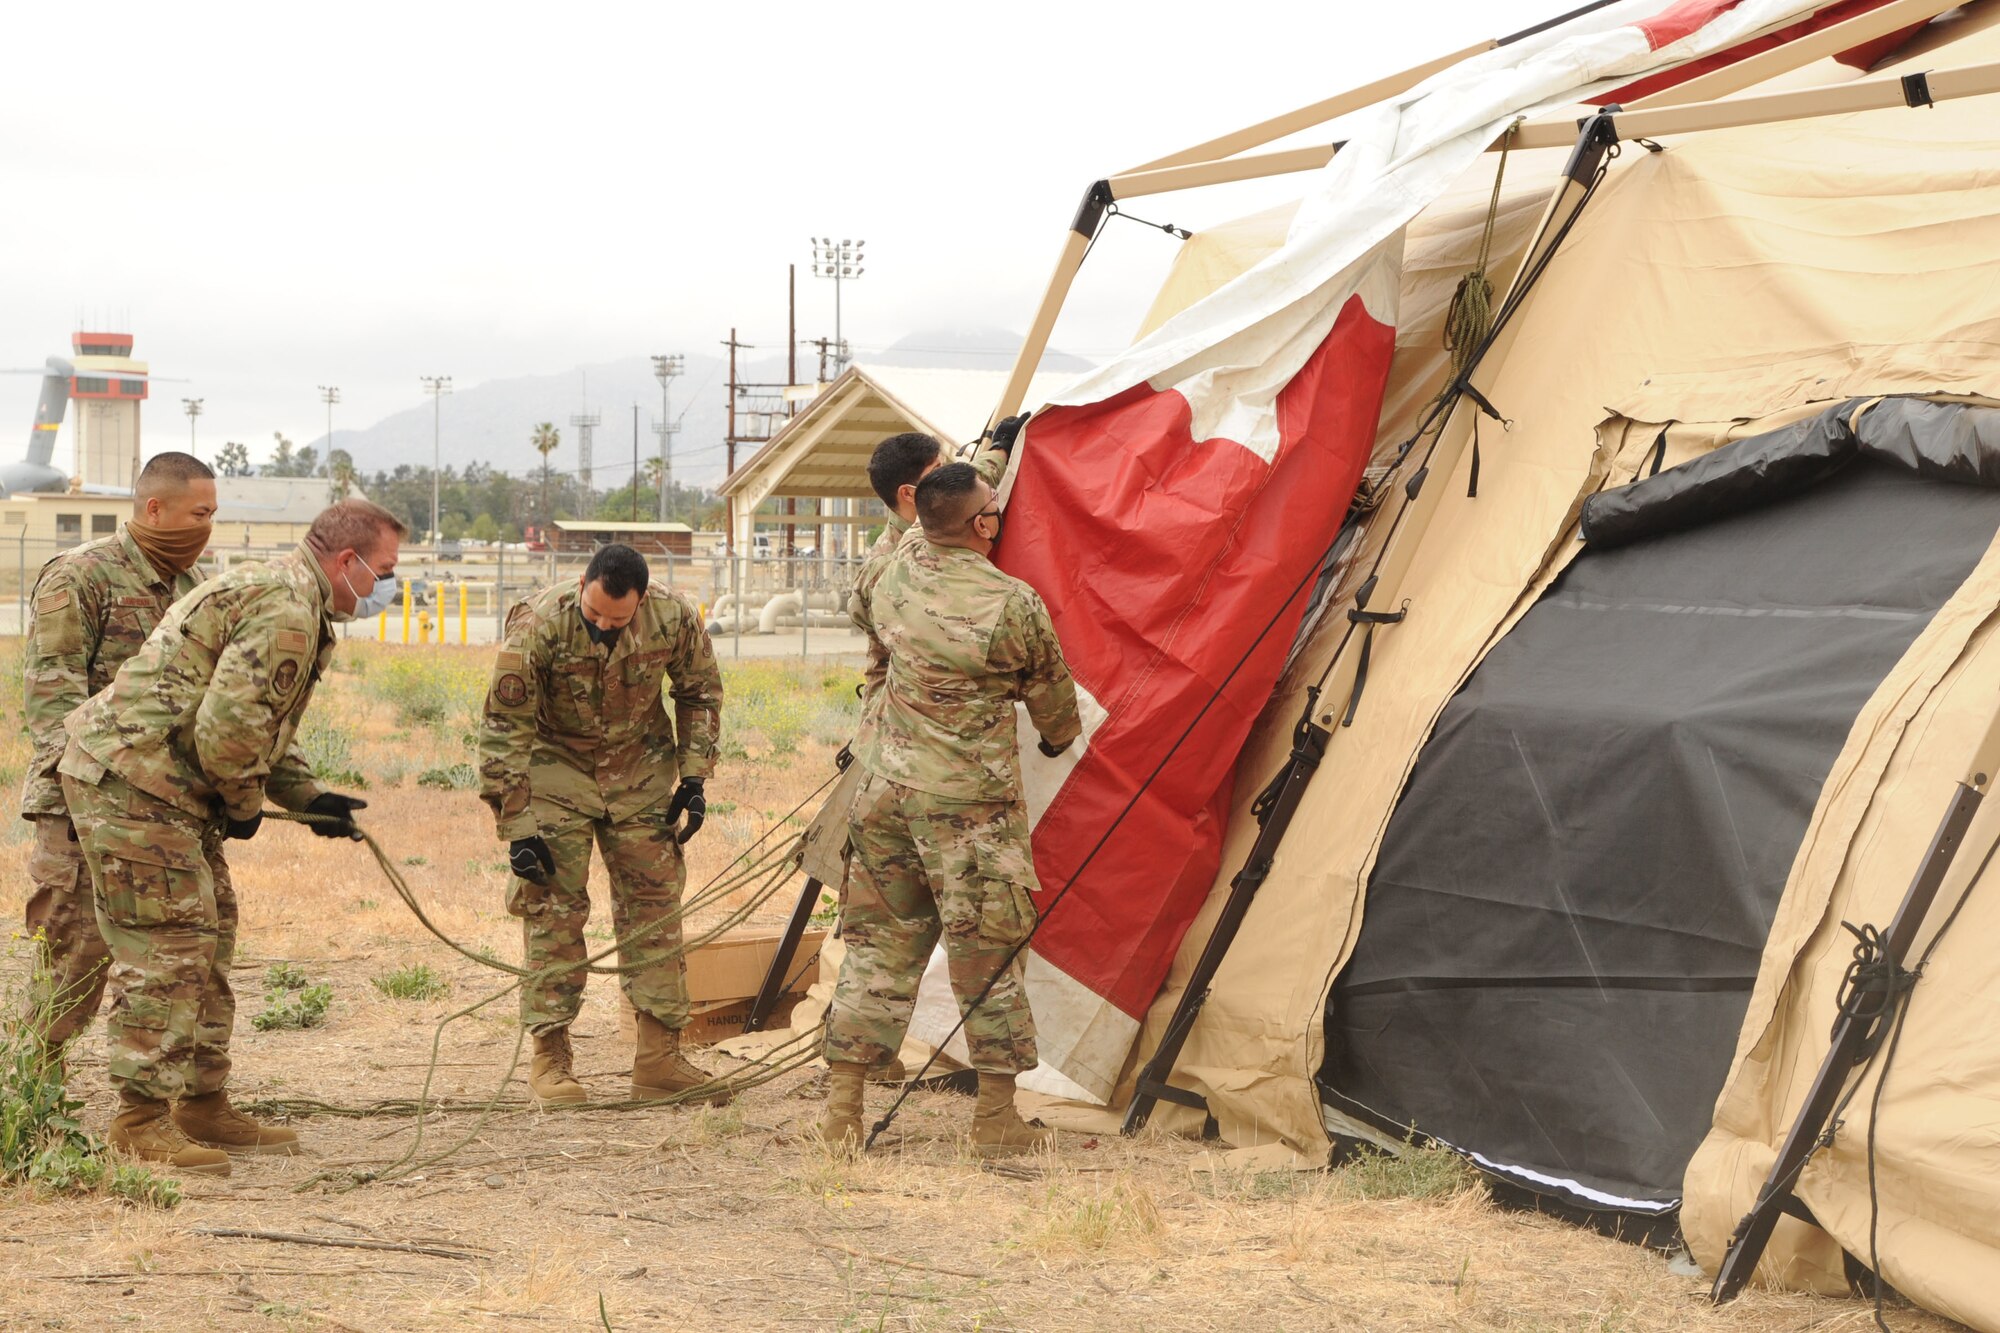 Reserve Citizen Airmen set up an expeditionary medical support system (EMEDS), a field hospital, in support of Exercise NEXUS DAWN at March Air Reserve Base, California, April 26, 2021.